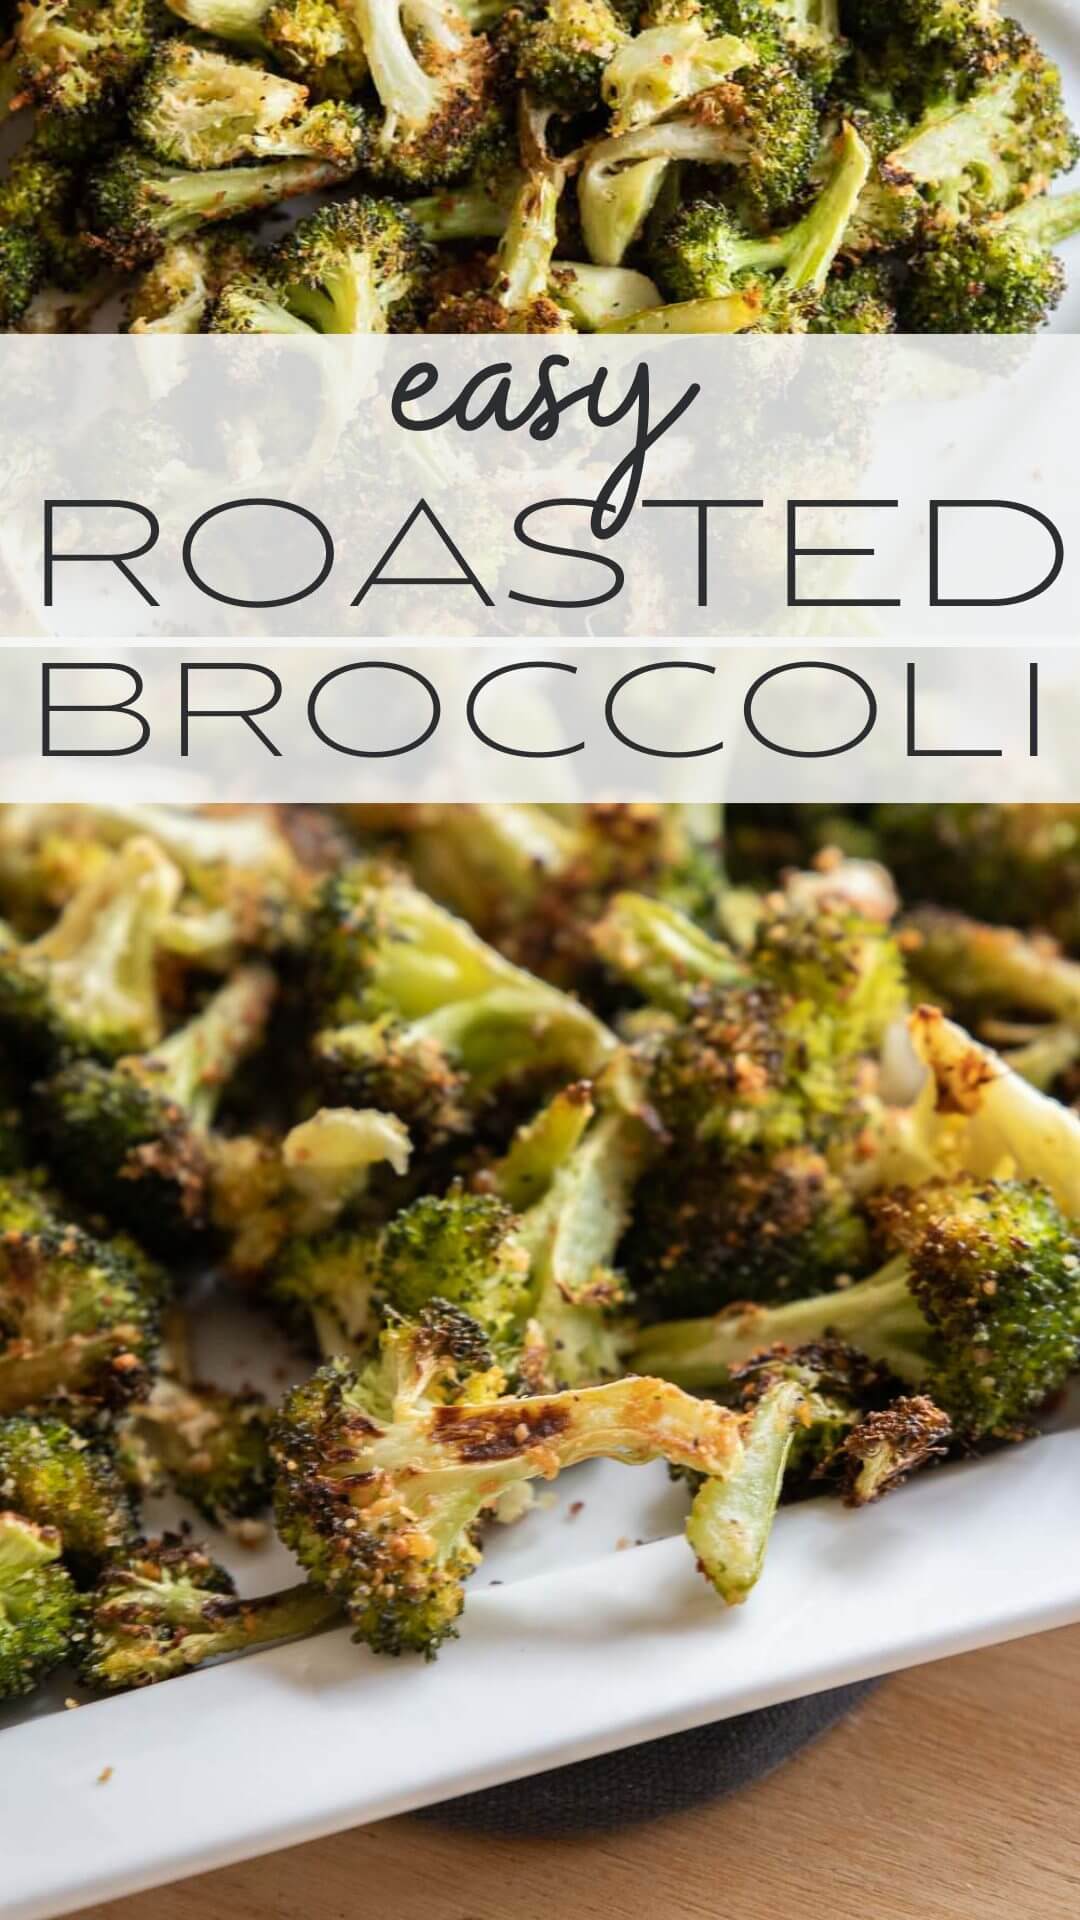 Make this easy roasted broccoli with parmesan as your next side dish. This is an easy side dish that can be made in about 25 minutes!